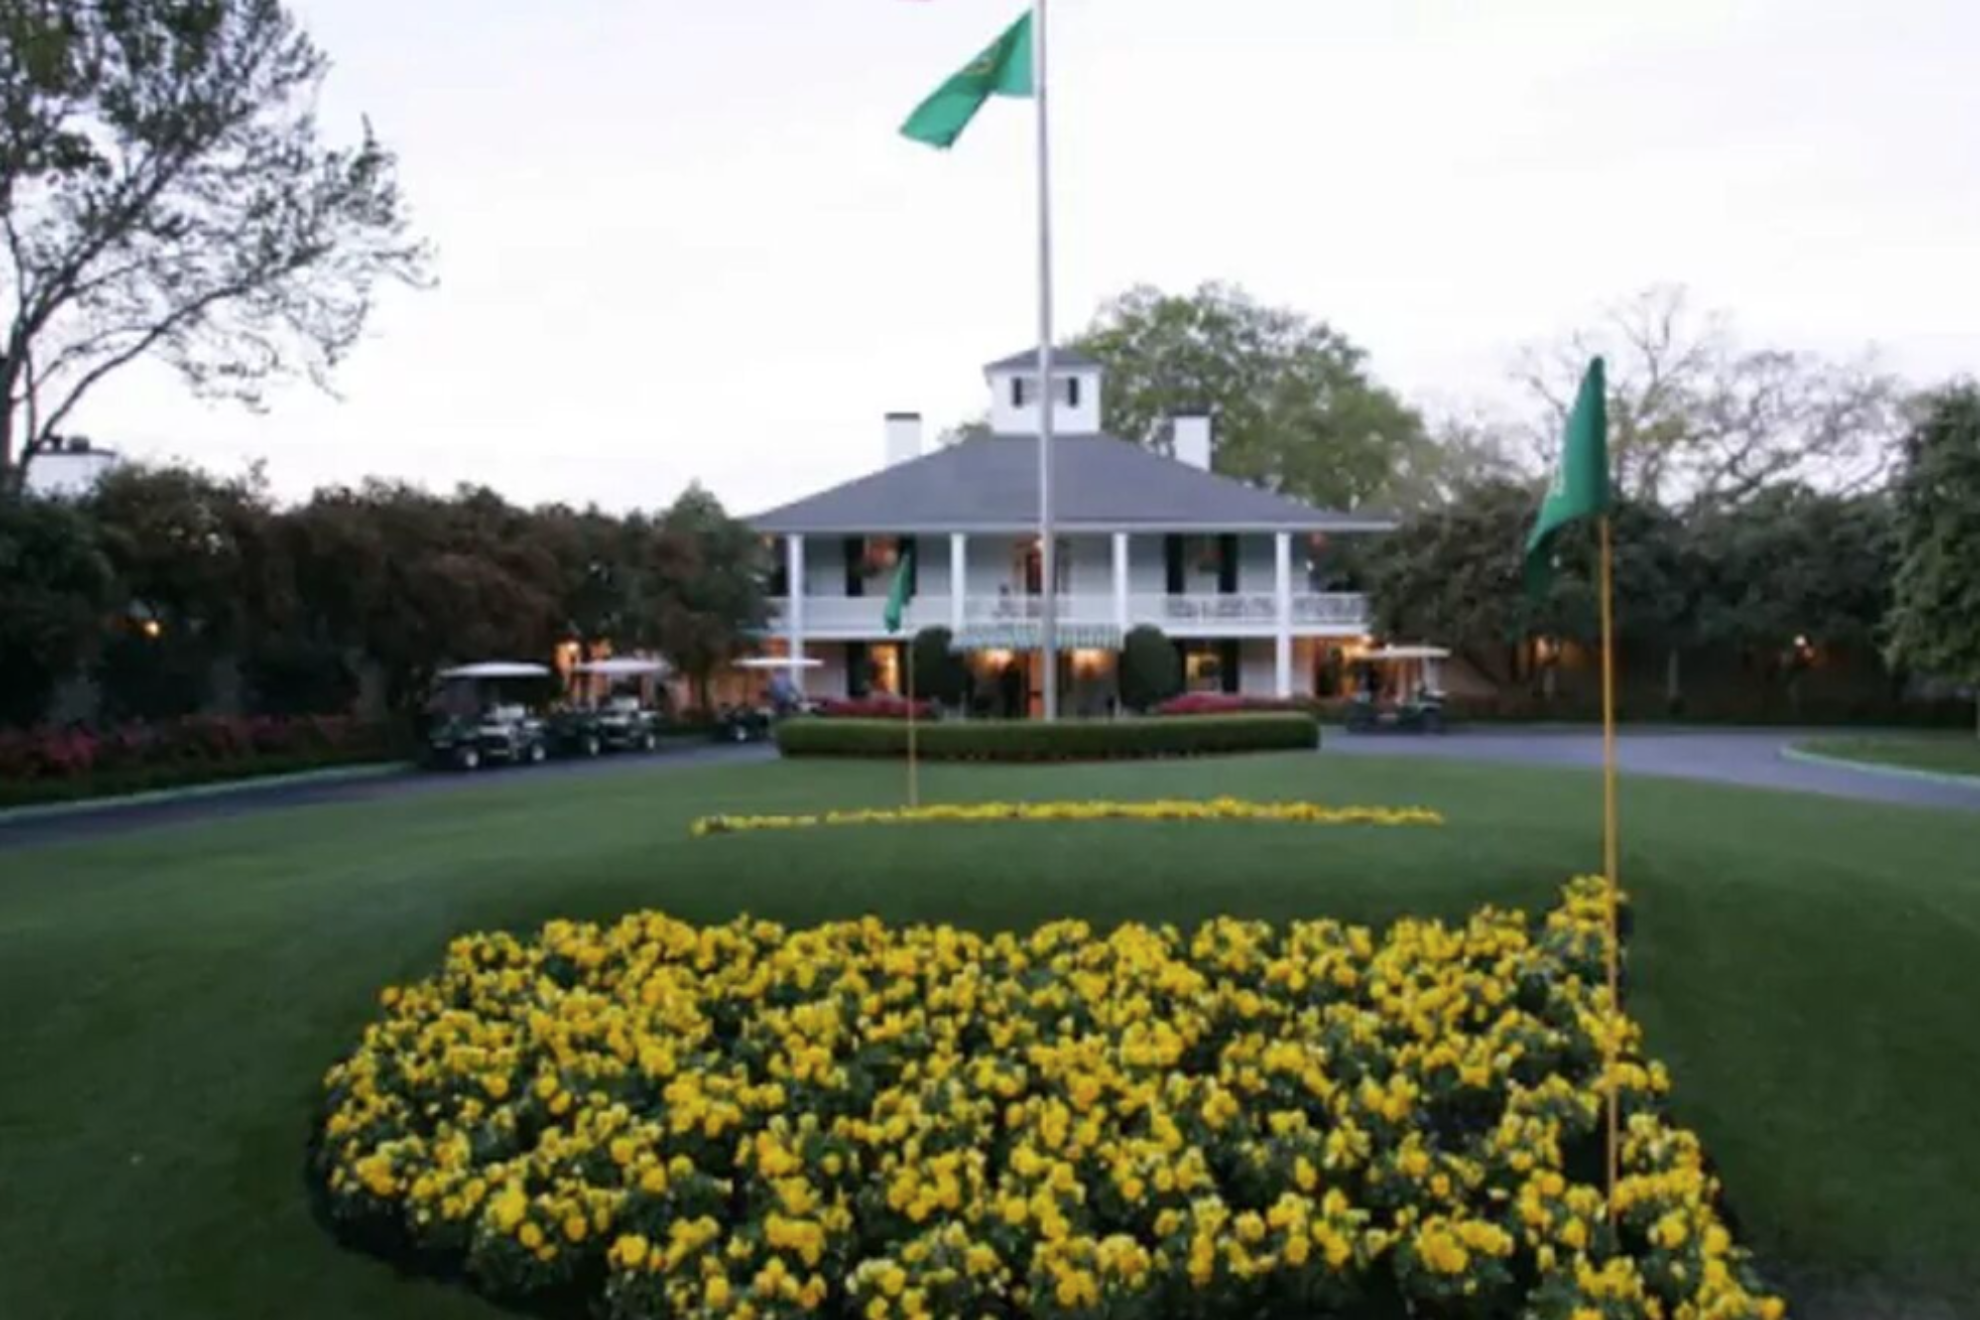 Masters Scoring Record: What is the lowest 72 hole score at the Masters?